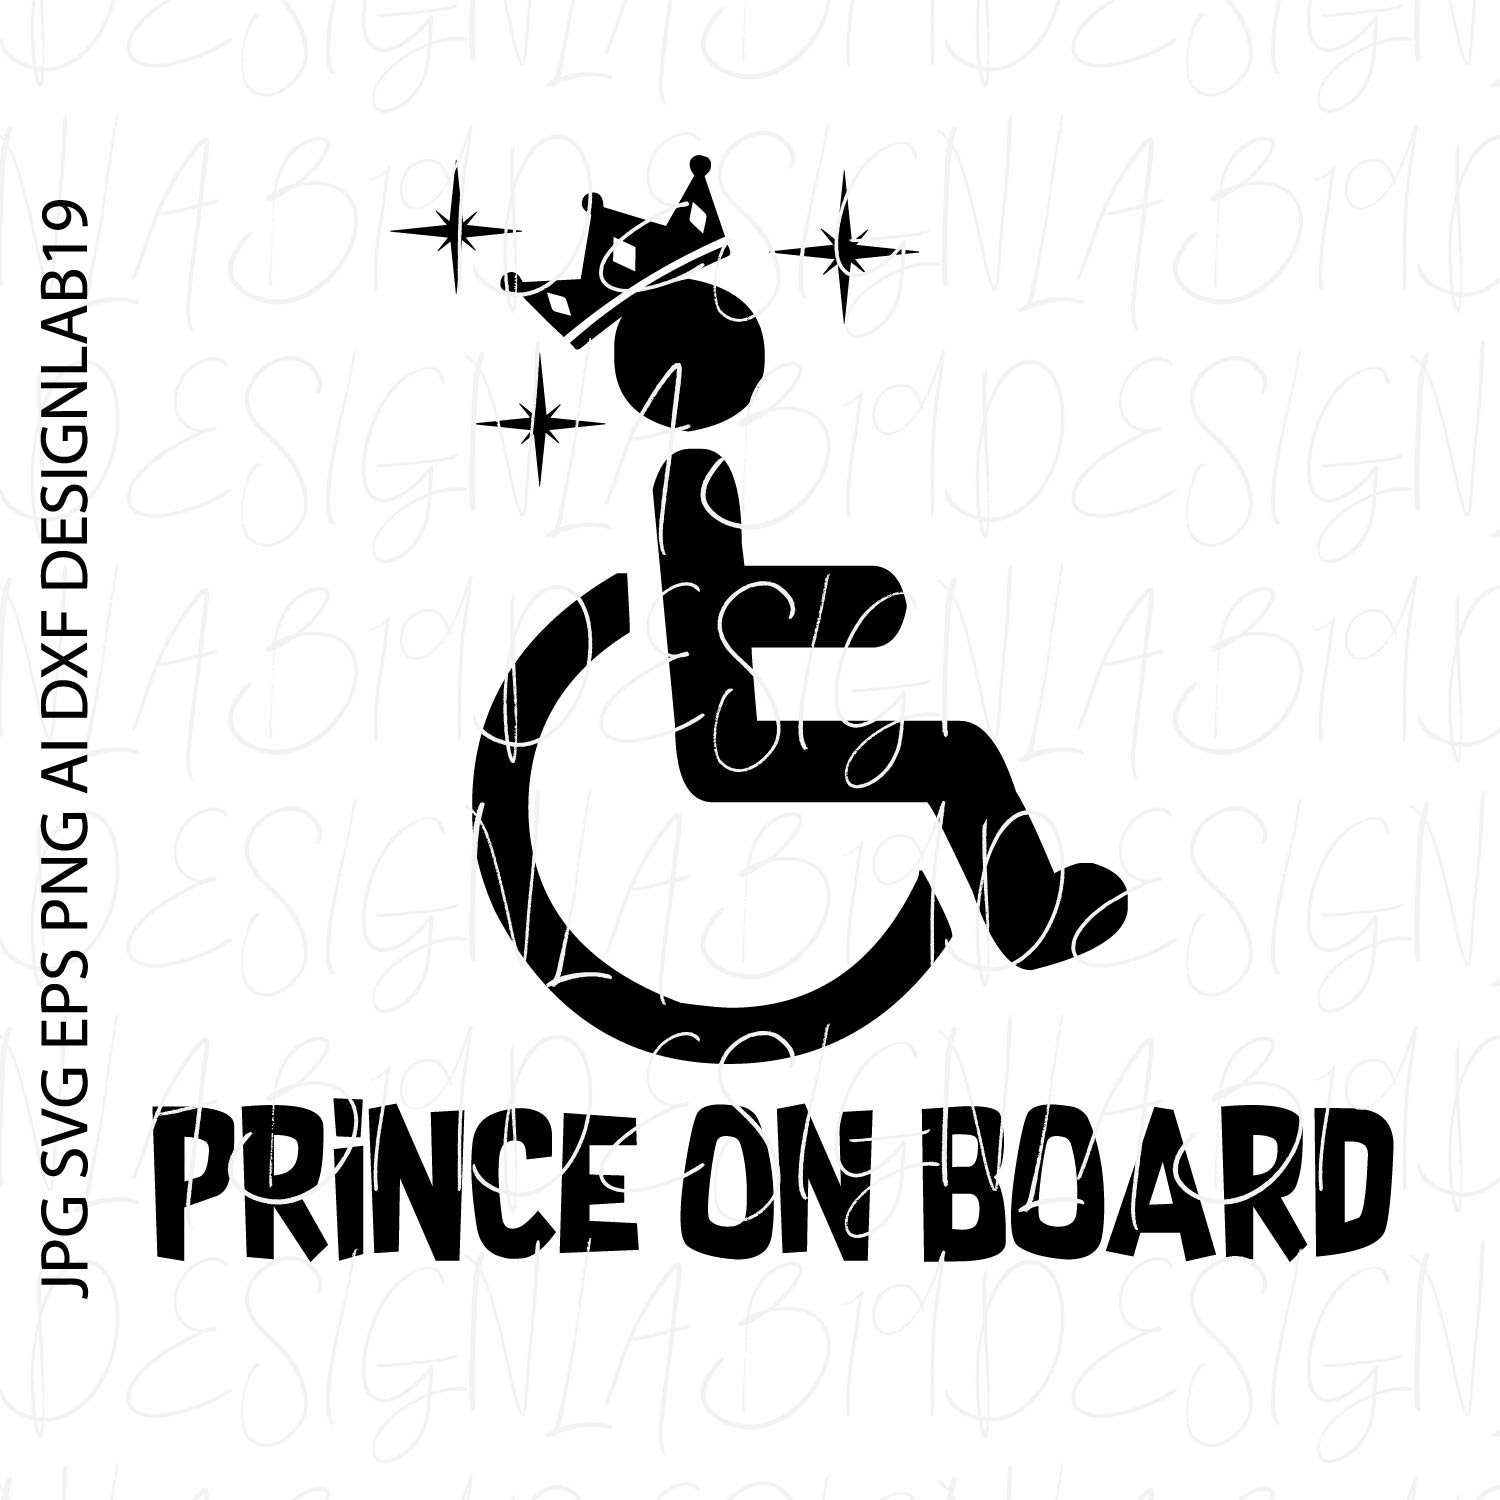 Prince on Board Handicap Wheel Chair Disabled Disability